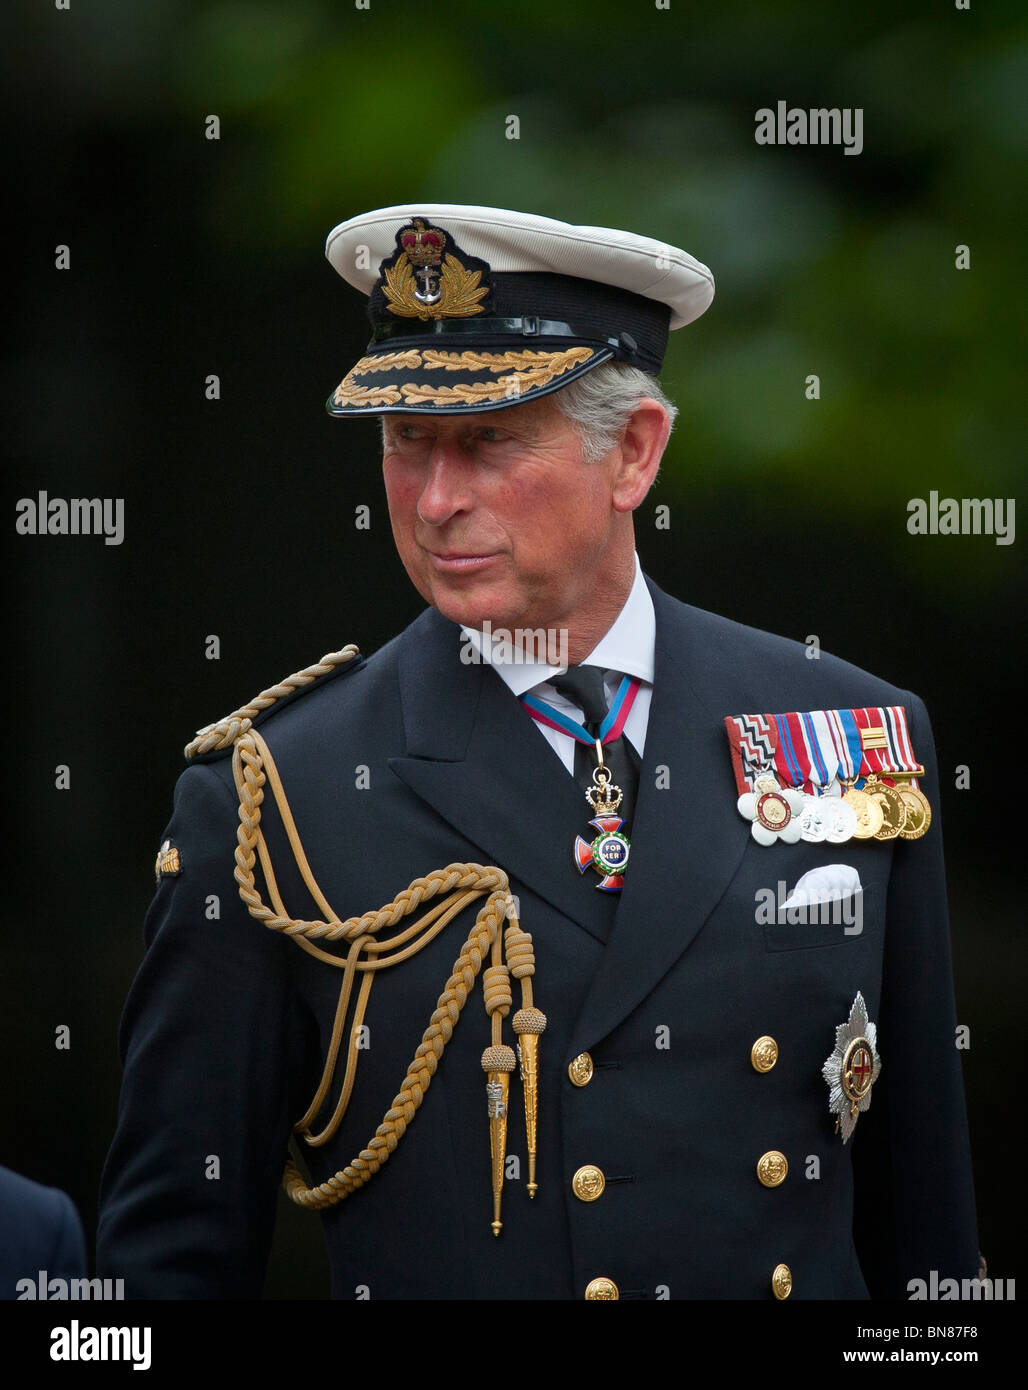 Royal navy uniform hi-res stock photography and images - Alamy